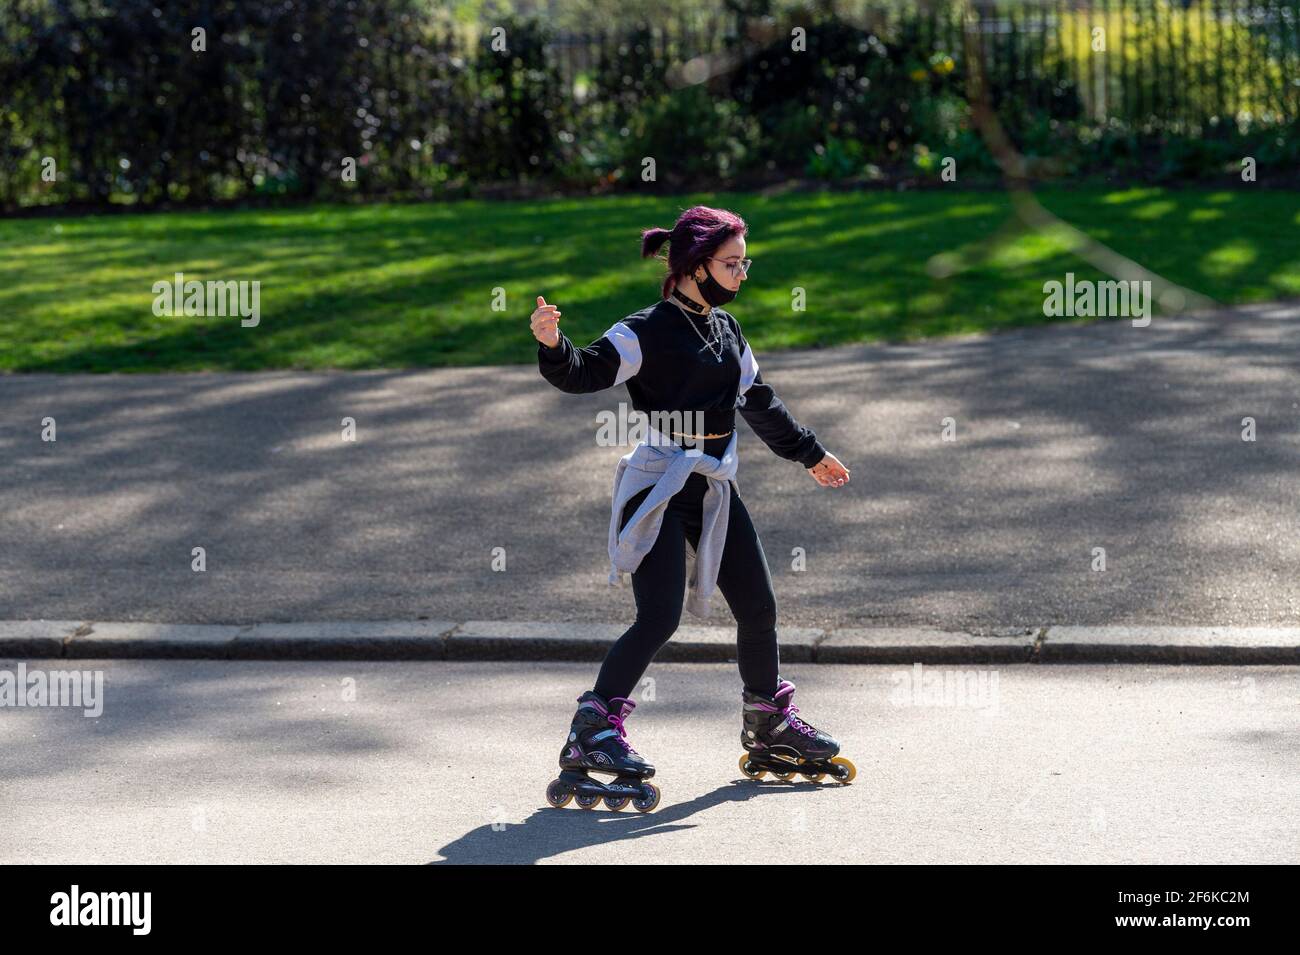 March 29, 2021, London, United Kingdom: A woman on skates seen in Londonâ€™s Hyde Park. (Credit Image: © Dave Rushen/SOPA Images via ZUMA Wire) Stock Photo